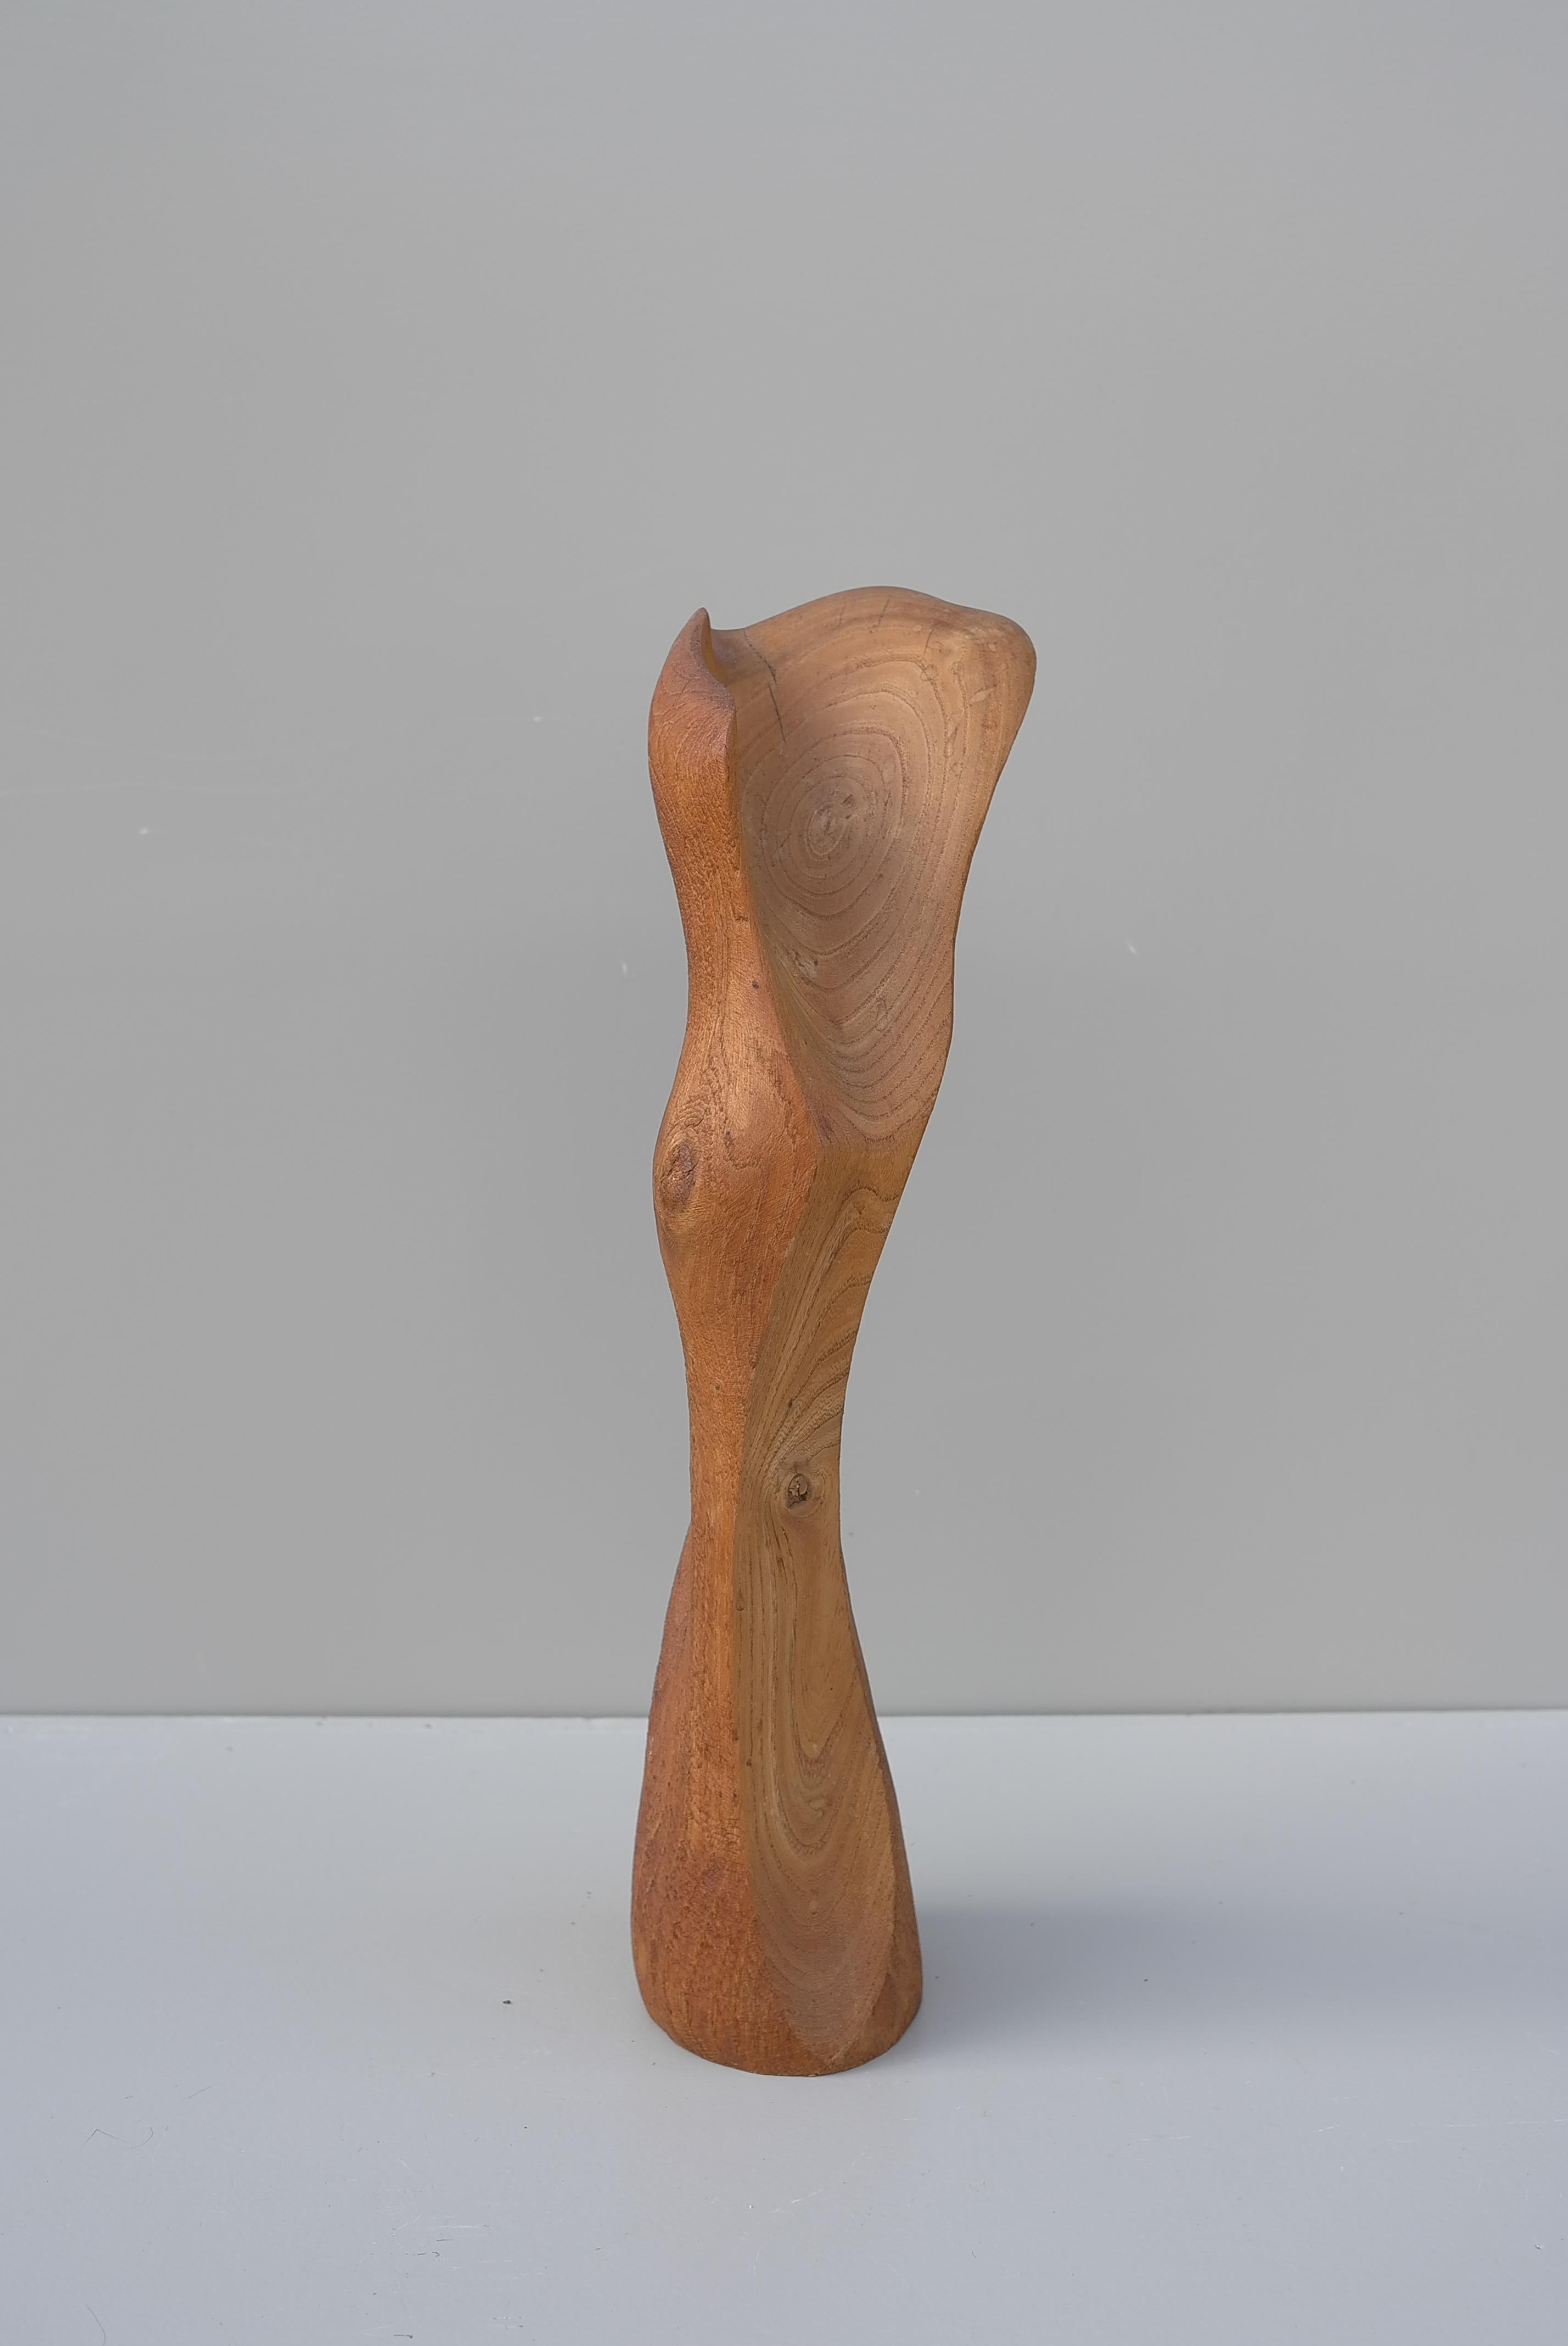  Abstract Mid-Century Modern Organic Wooden Sculpture, 1960's For Sale 1